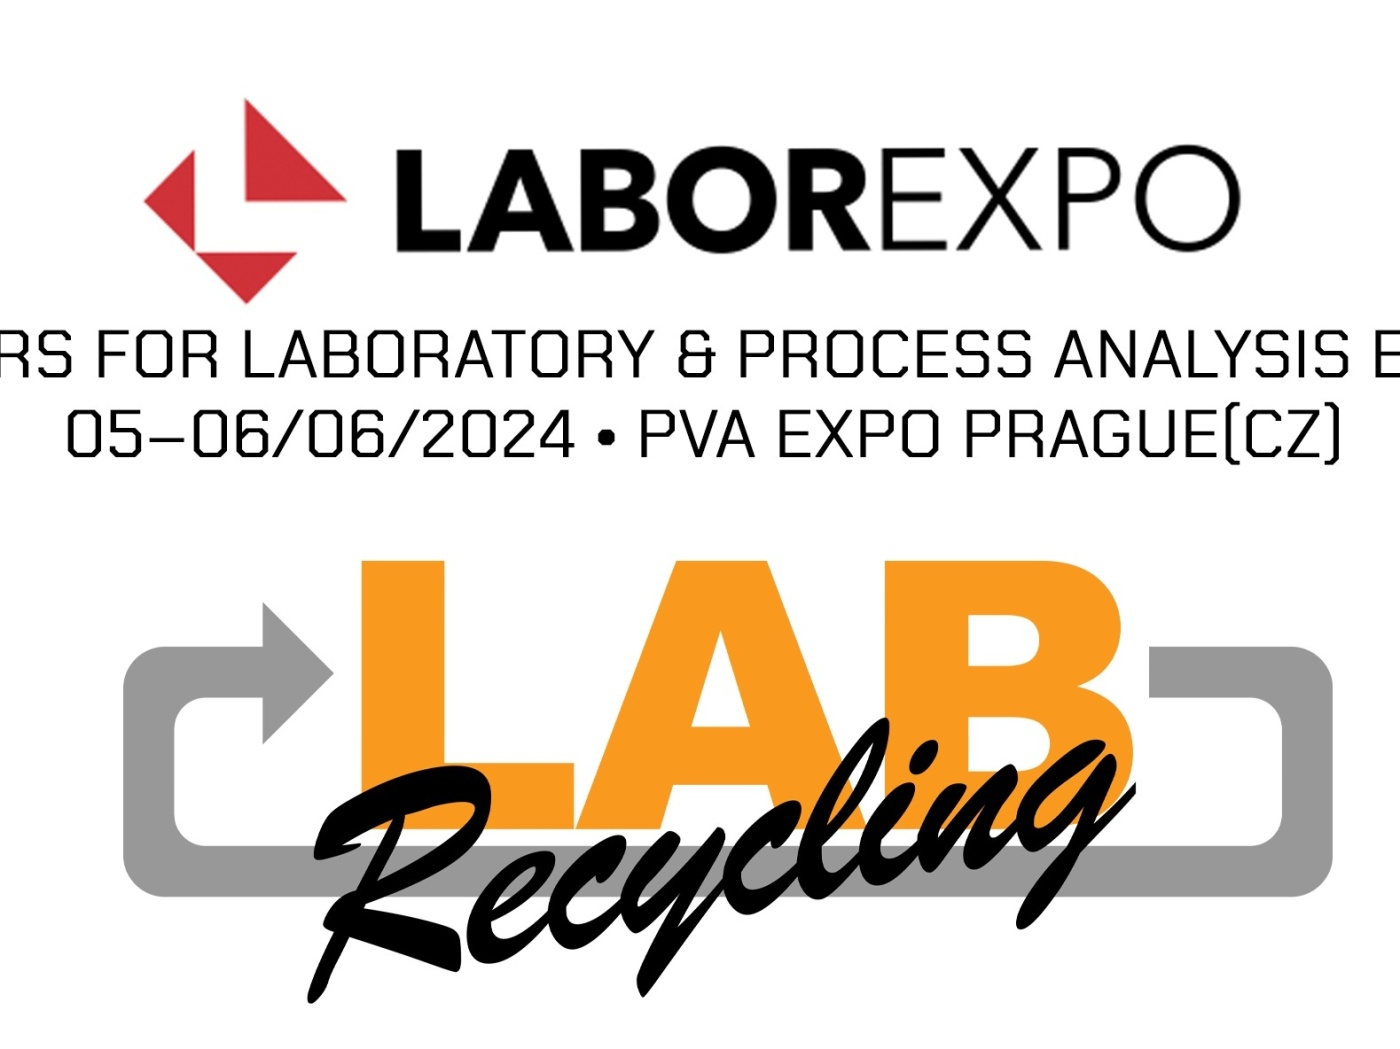 Labrecycling is present at LABOREXPO 2024